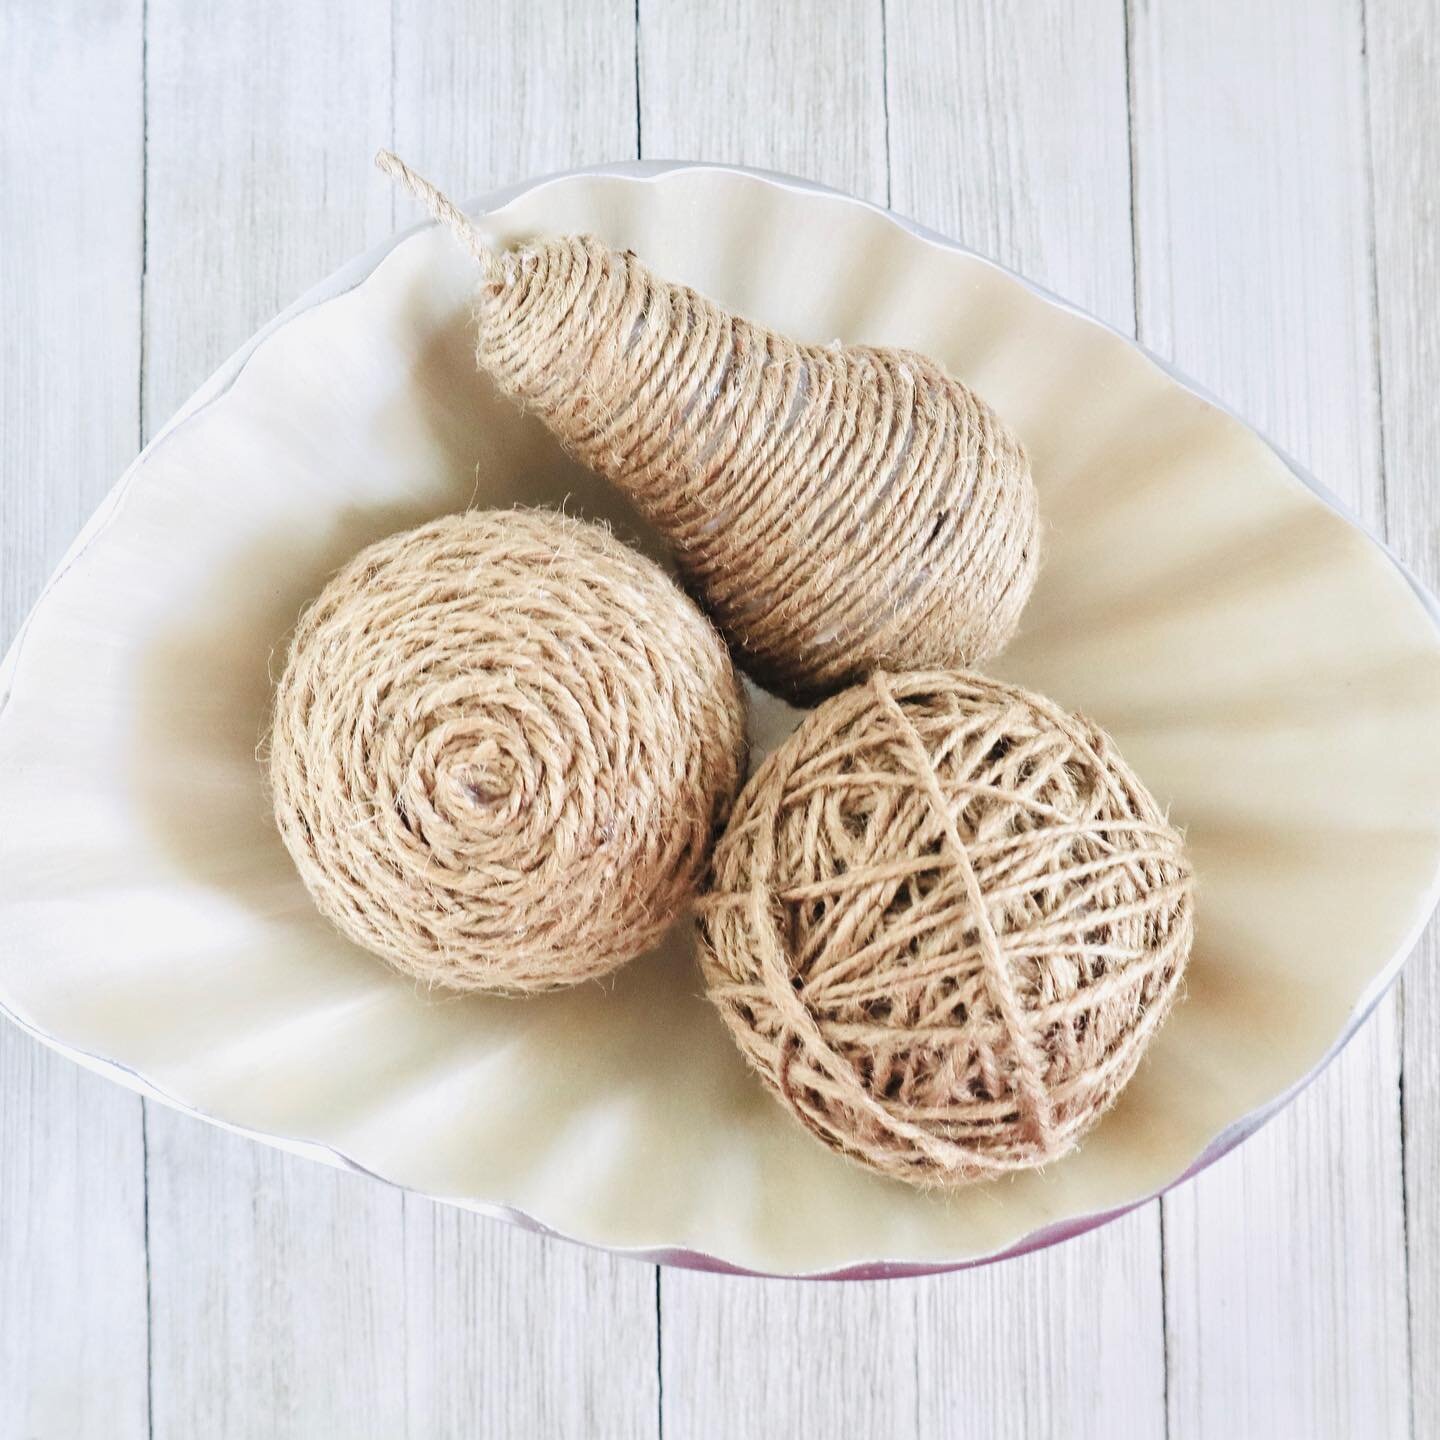 There are so many different ways to style these decorative twine balls. I share 6 different ways to make these in my latest YouTube video - it just went live!
⁣⁣⁣⁣⁣⁣⁣⁣⁣⁣⁣⁣⁣
⤴️ 𝐈 𝐝𝐨 𝐜𝐫𝐚𝐟𝐭𝐬 𝐚𝐧𝐝 𝐡𝐨𝐦𝐞 𝐝𝐞𝐜𝐨𝐫 𝐨𝐧 𝐘𝐨𝐮𝐓𝐮𝐛𝐞. 𝐋𝐢?